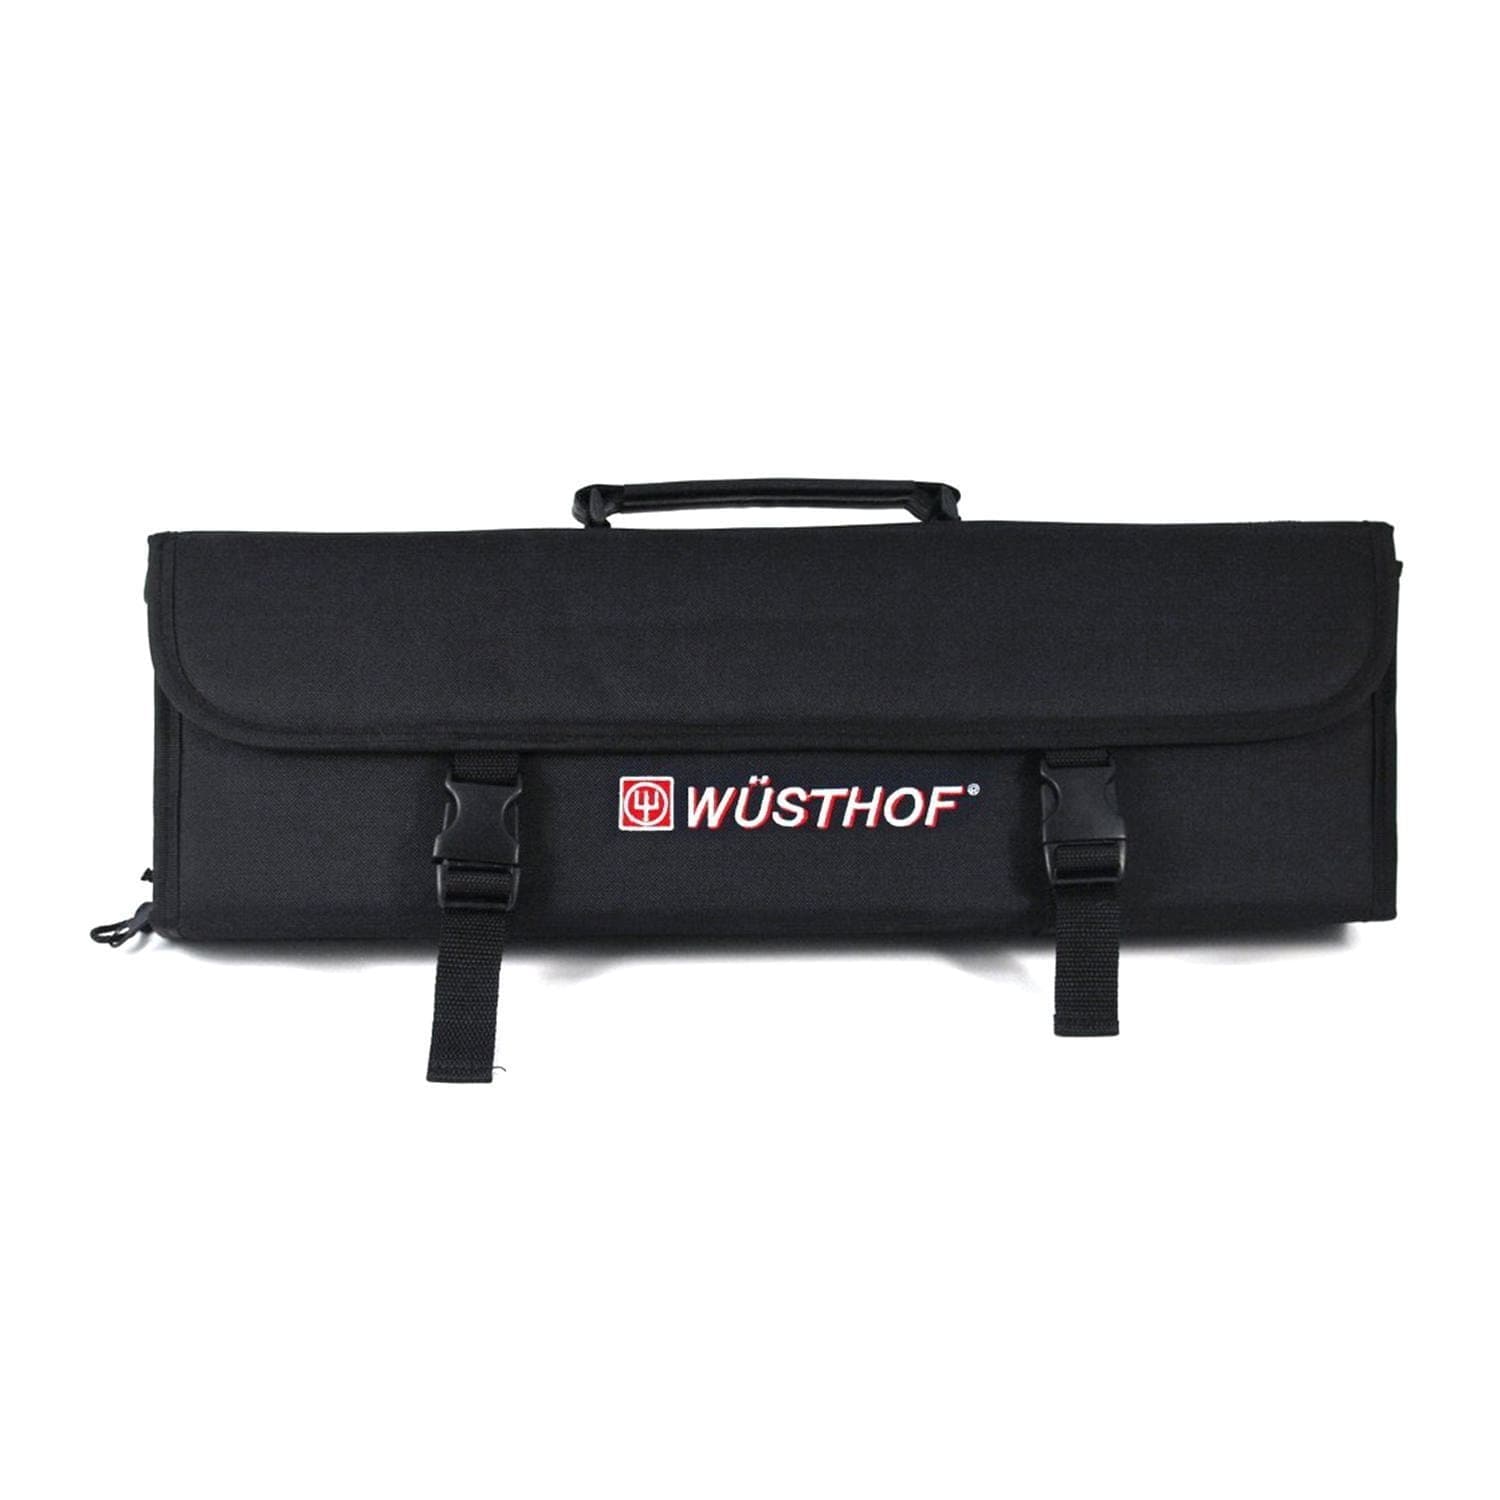 Wusthof Chef's Knife Case for 12 Piece Knives - 7379/10 - Jashanmal Home